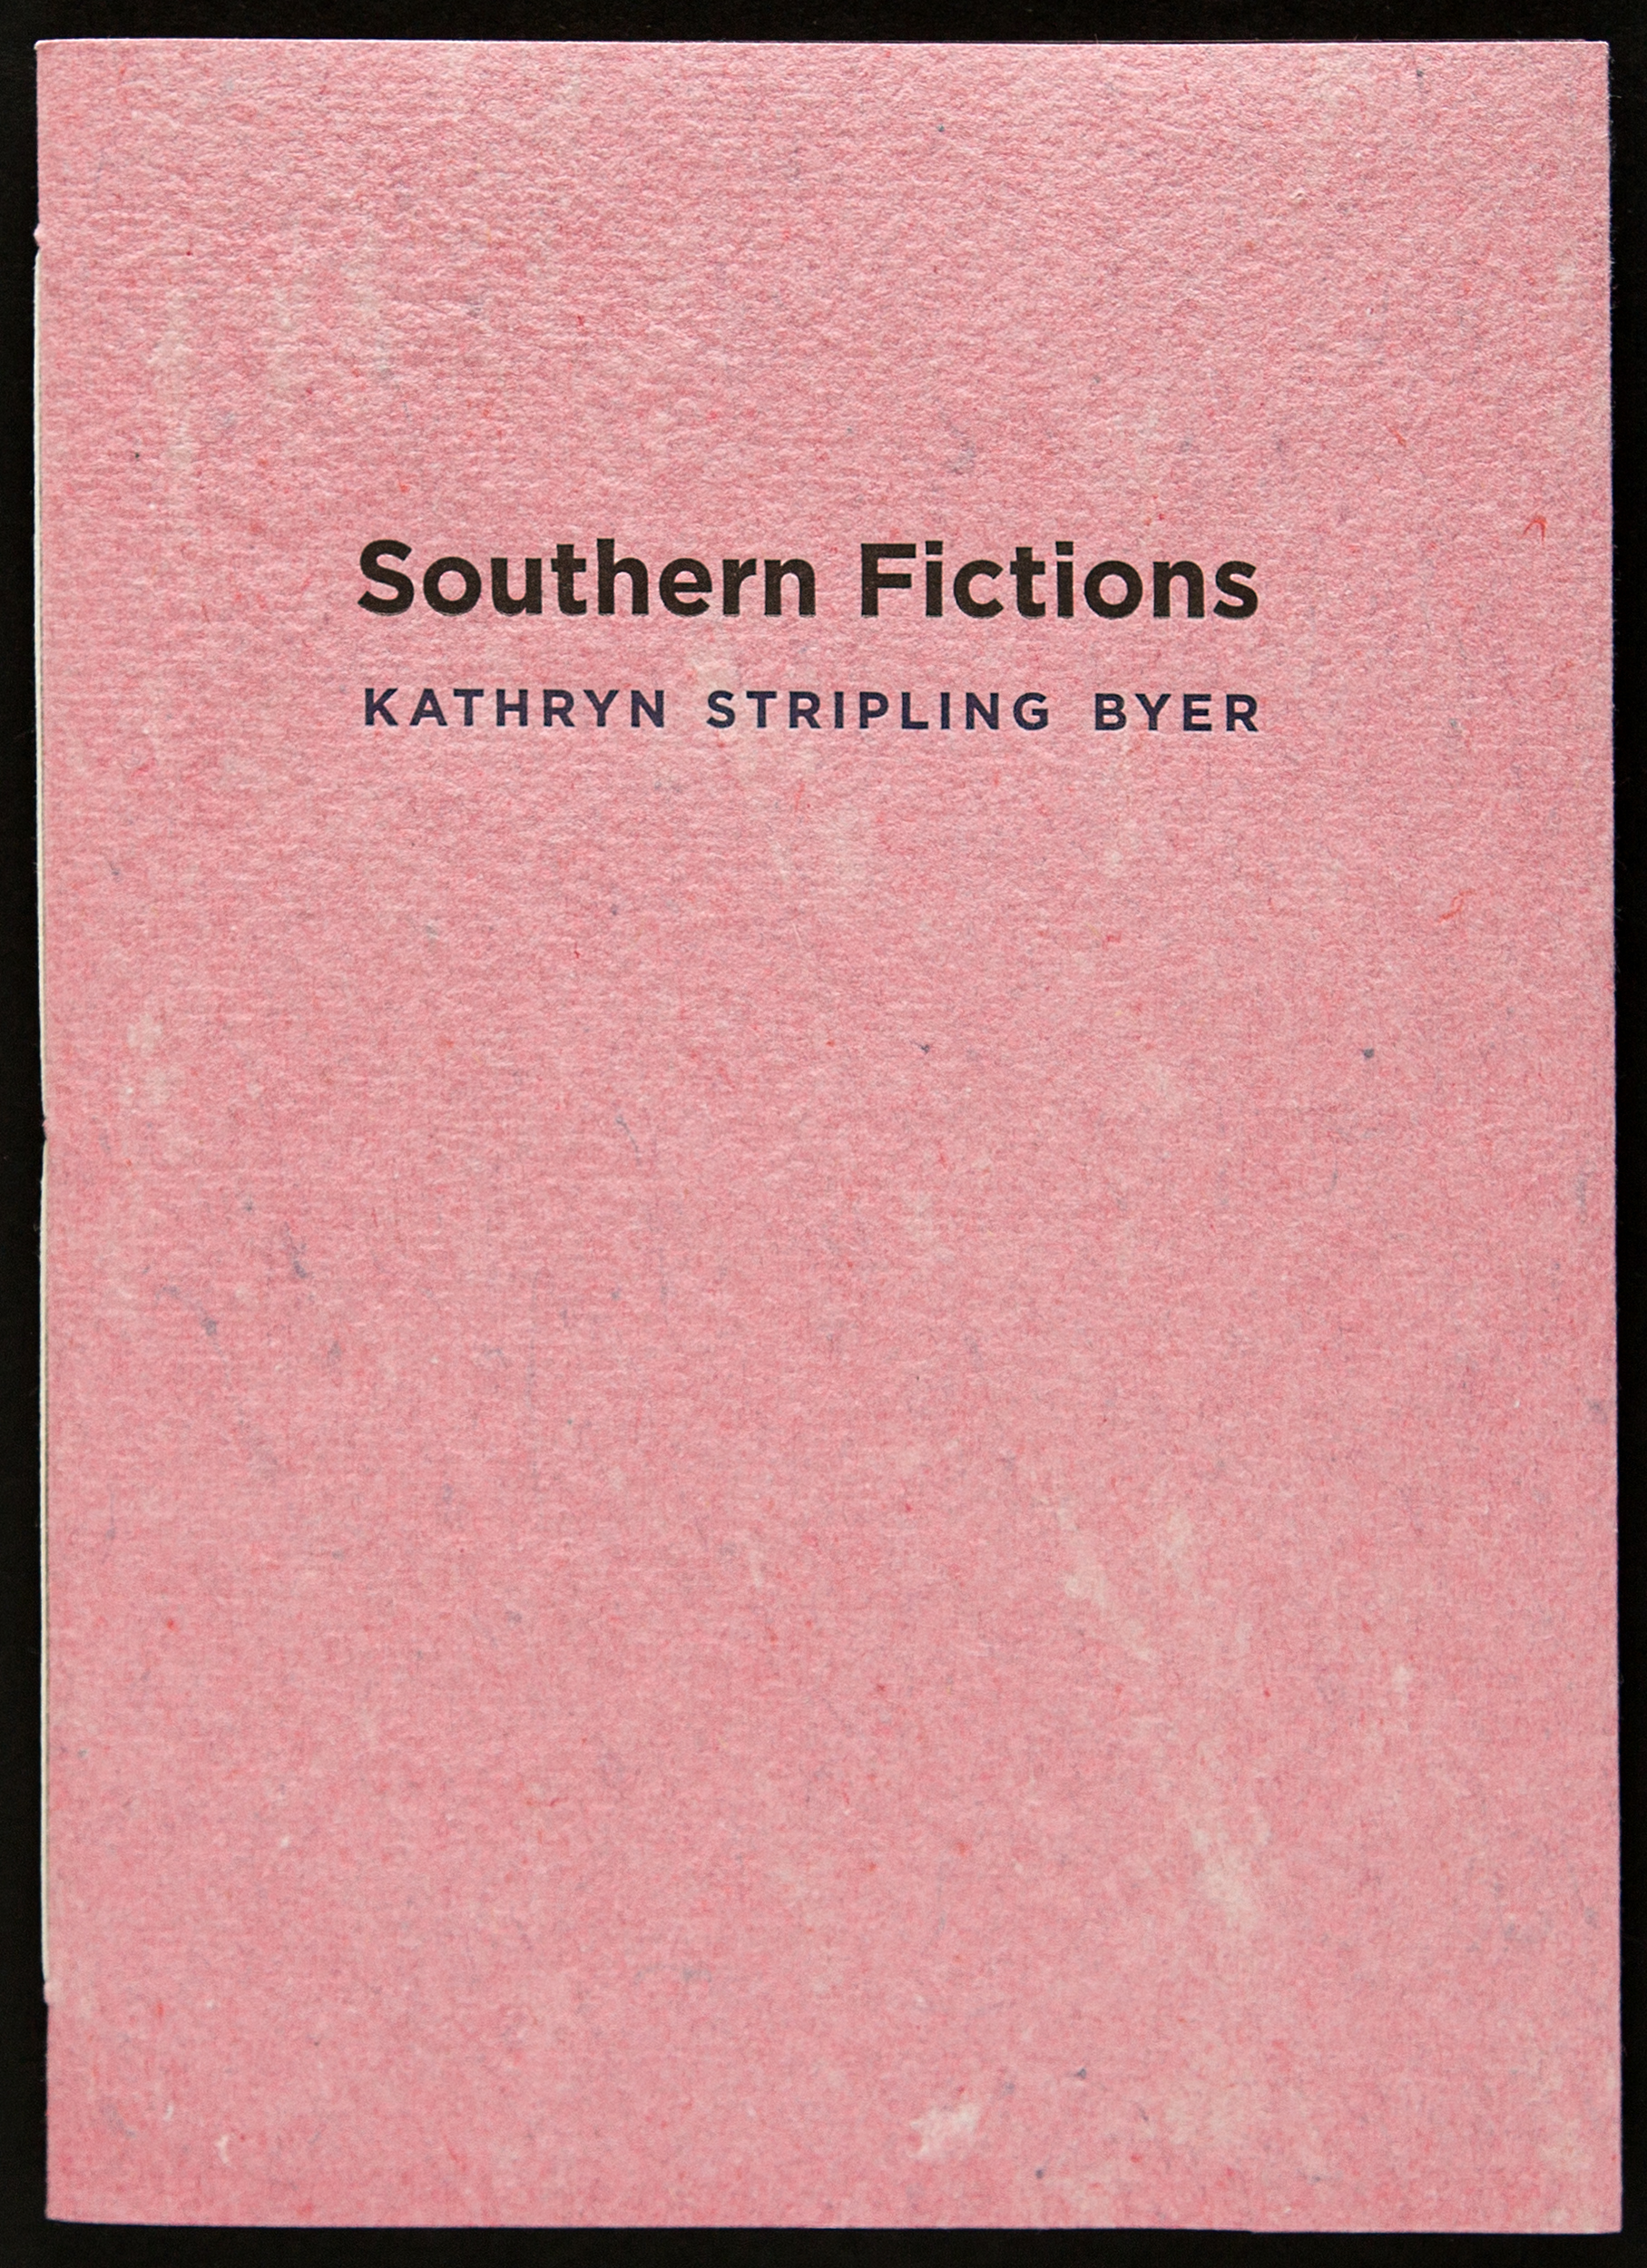  A book of sonnets by the former poet laureate looking back at growing up in rural Georgia during the Jim Crow era. The fiirst sonnet mentions how she hated how her father used to fly the Confederate battle flag—so we cut up several battle flags and 